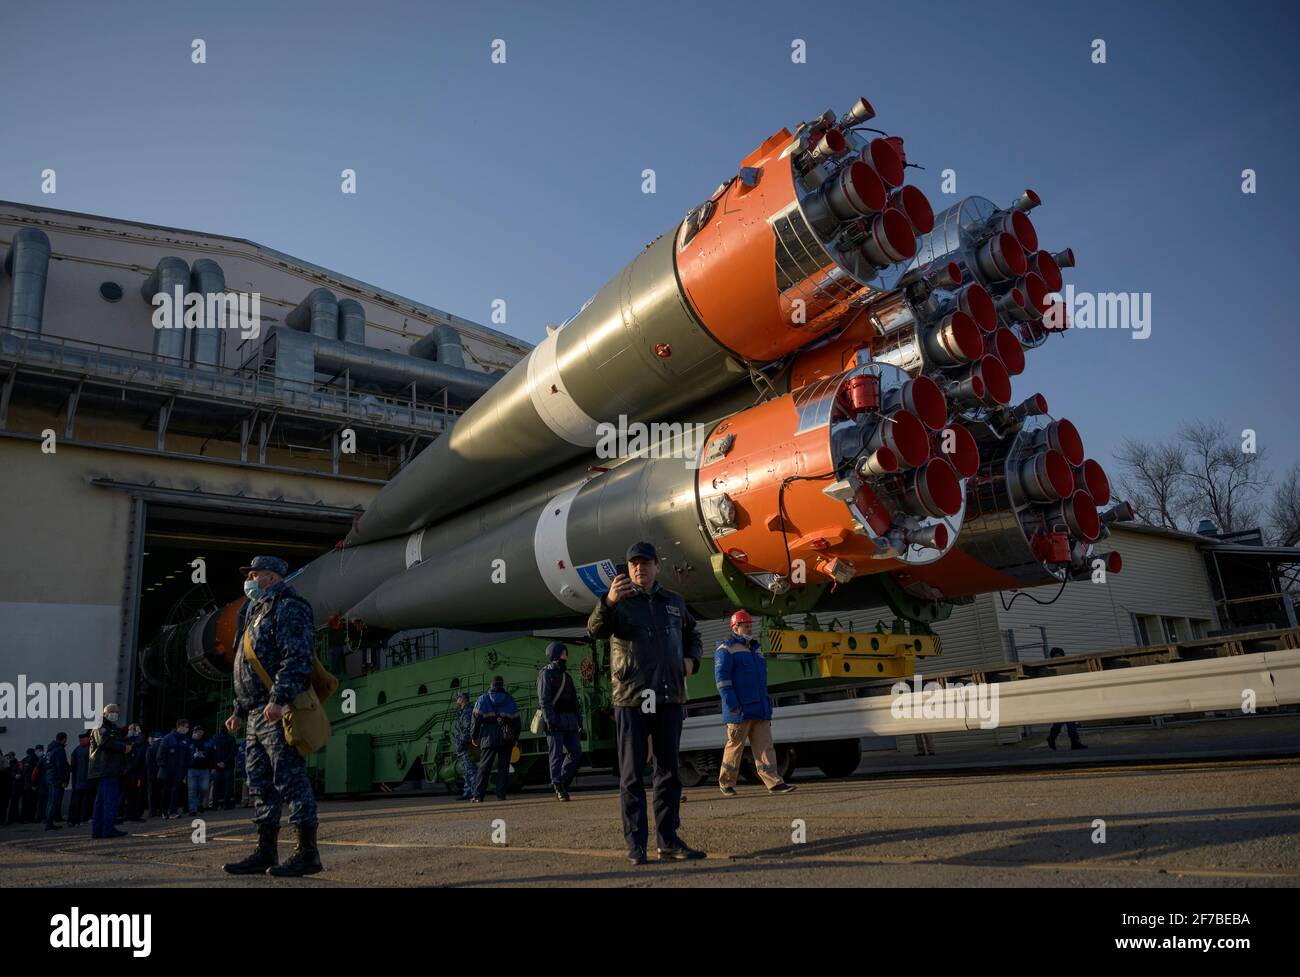 The Soyuz rocket is rolled out by train to the launch pad at Site 31, Tuesday, April 6, 2021, at the Baikonur Cosmodrome in Kazakhstan. Expedition 65 NASA astronaut Mark Vande Hei, Roscosmos cosmonauts Pyotr Dubrov and Oleg Novitskiy are scheduled to launch aboard their Soyuz MS-18 spacecraft on April 9. Mandatory Credit: Bill Ingalls/NASA via CNP | usage worldwide Stock Photo